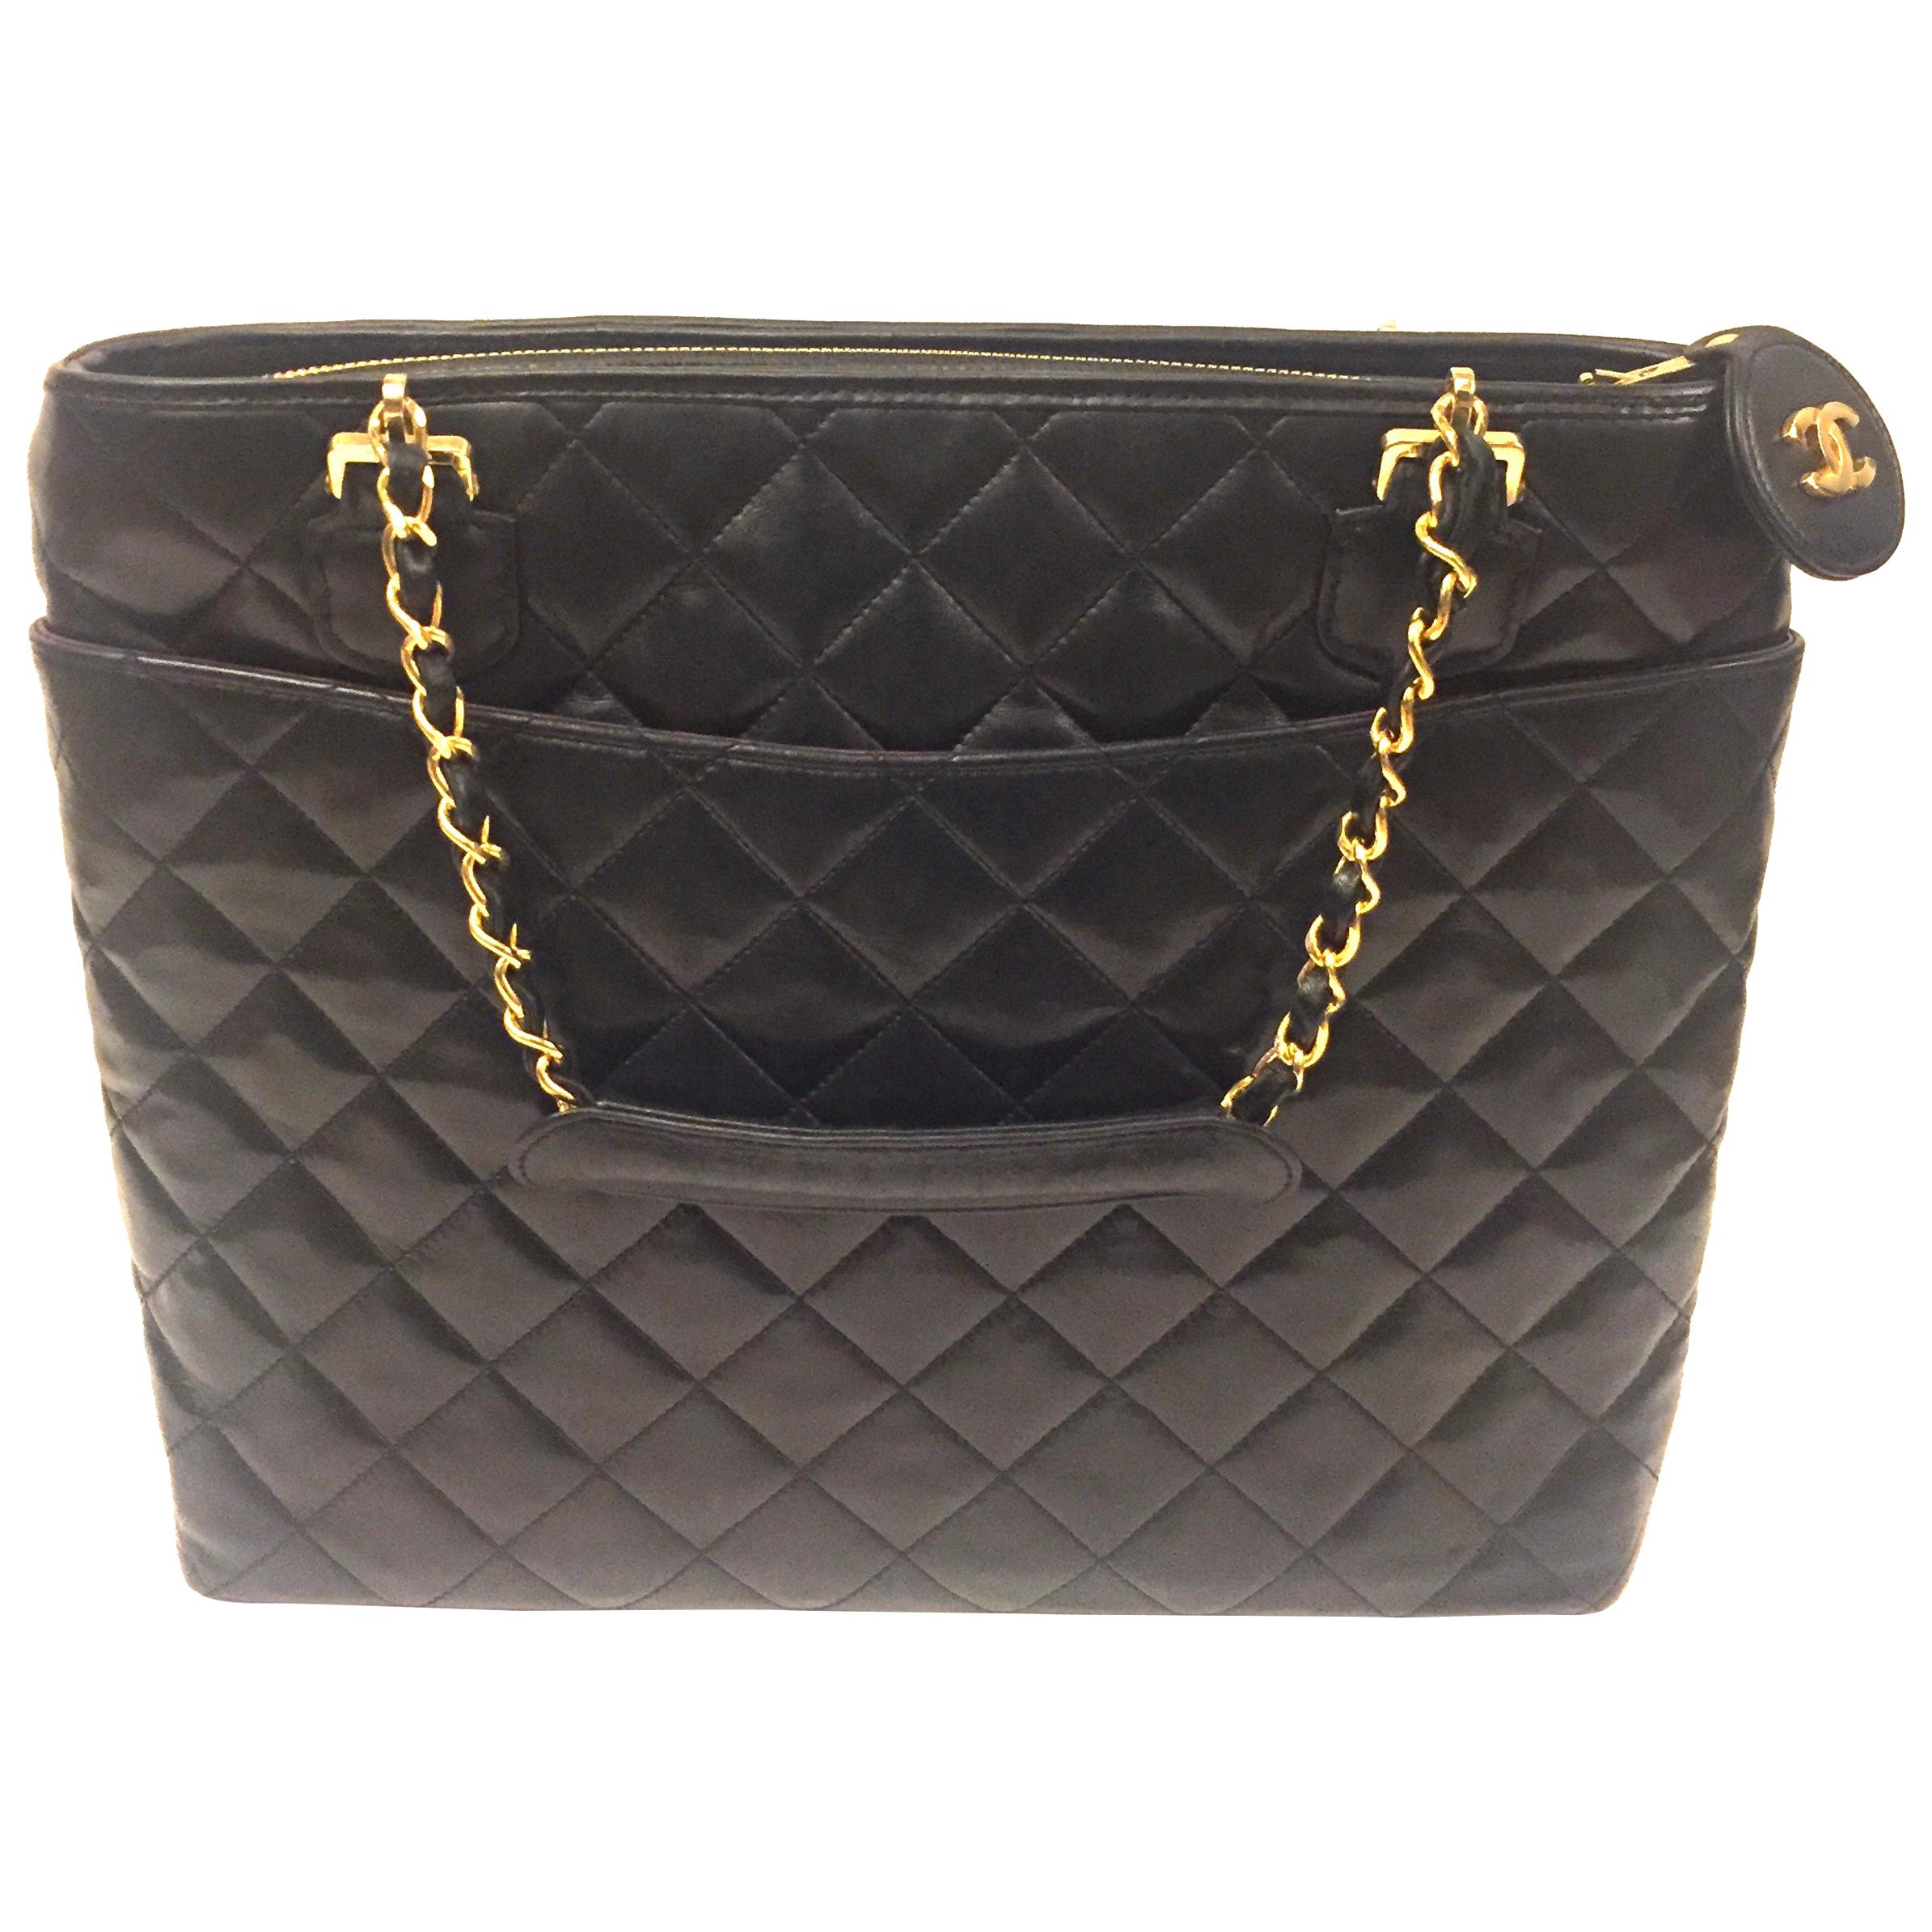 Chanel black quilted lambskin leather tote bag 